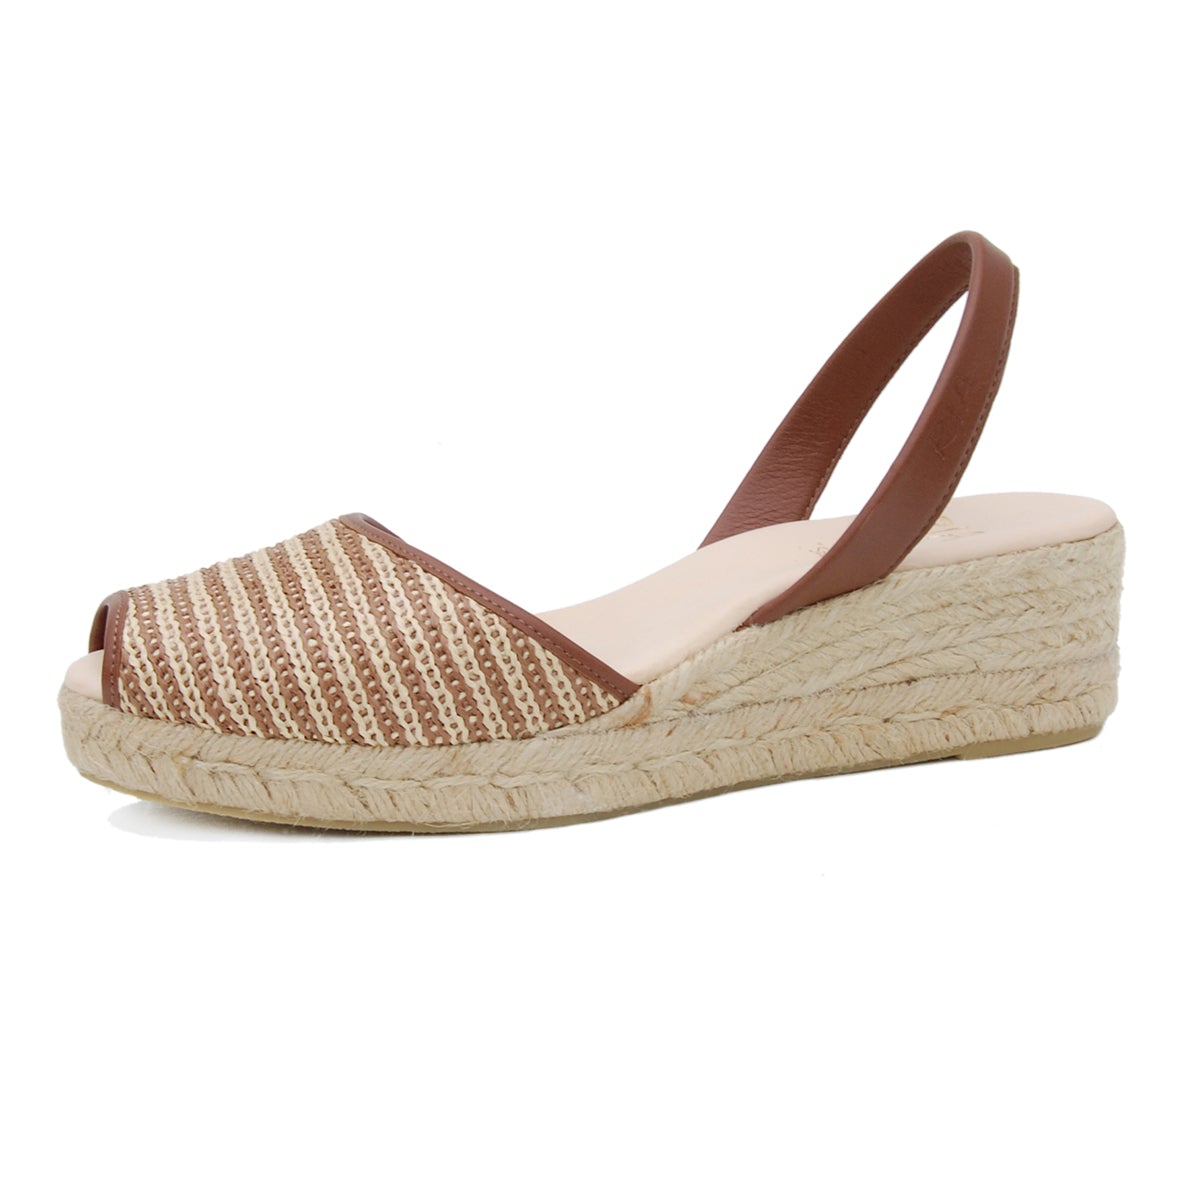 Parallel Culture Shoes and Fashion Online SHOES RIA MENORCA PALMA WEDGE TAN